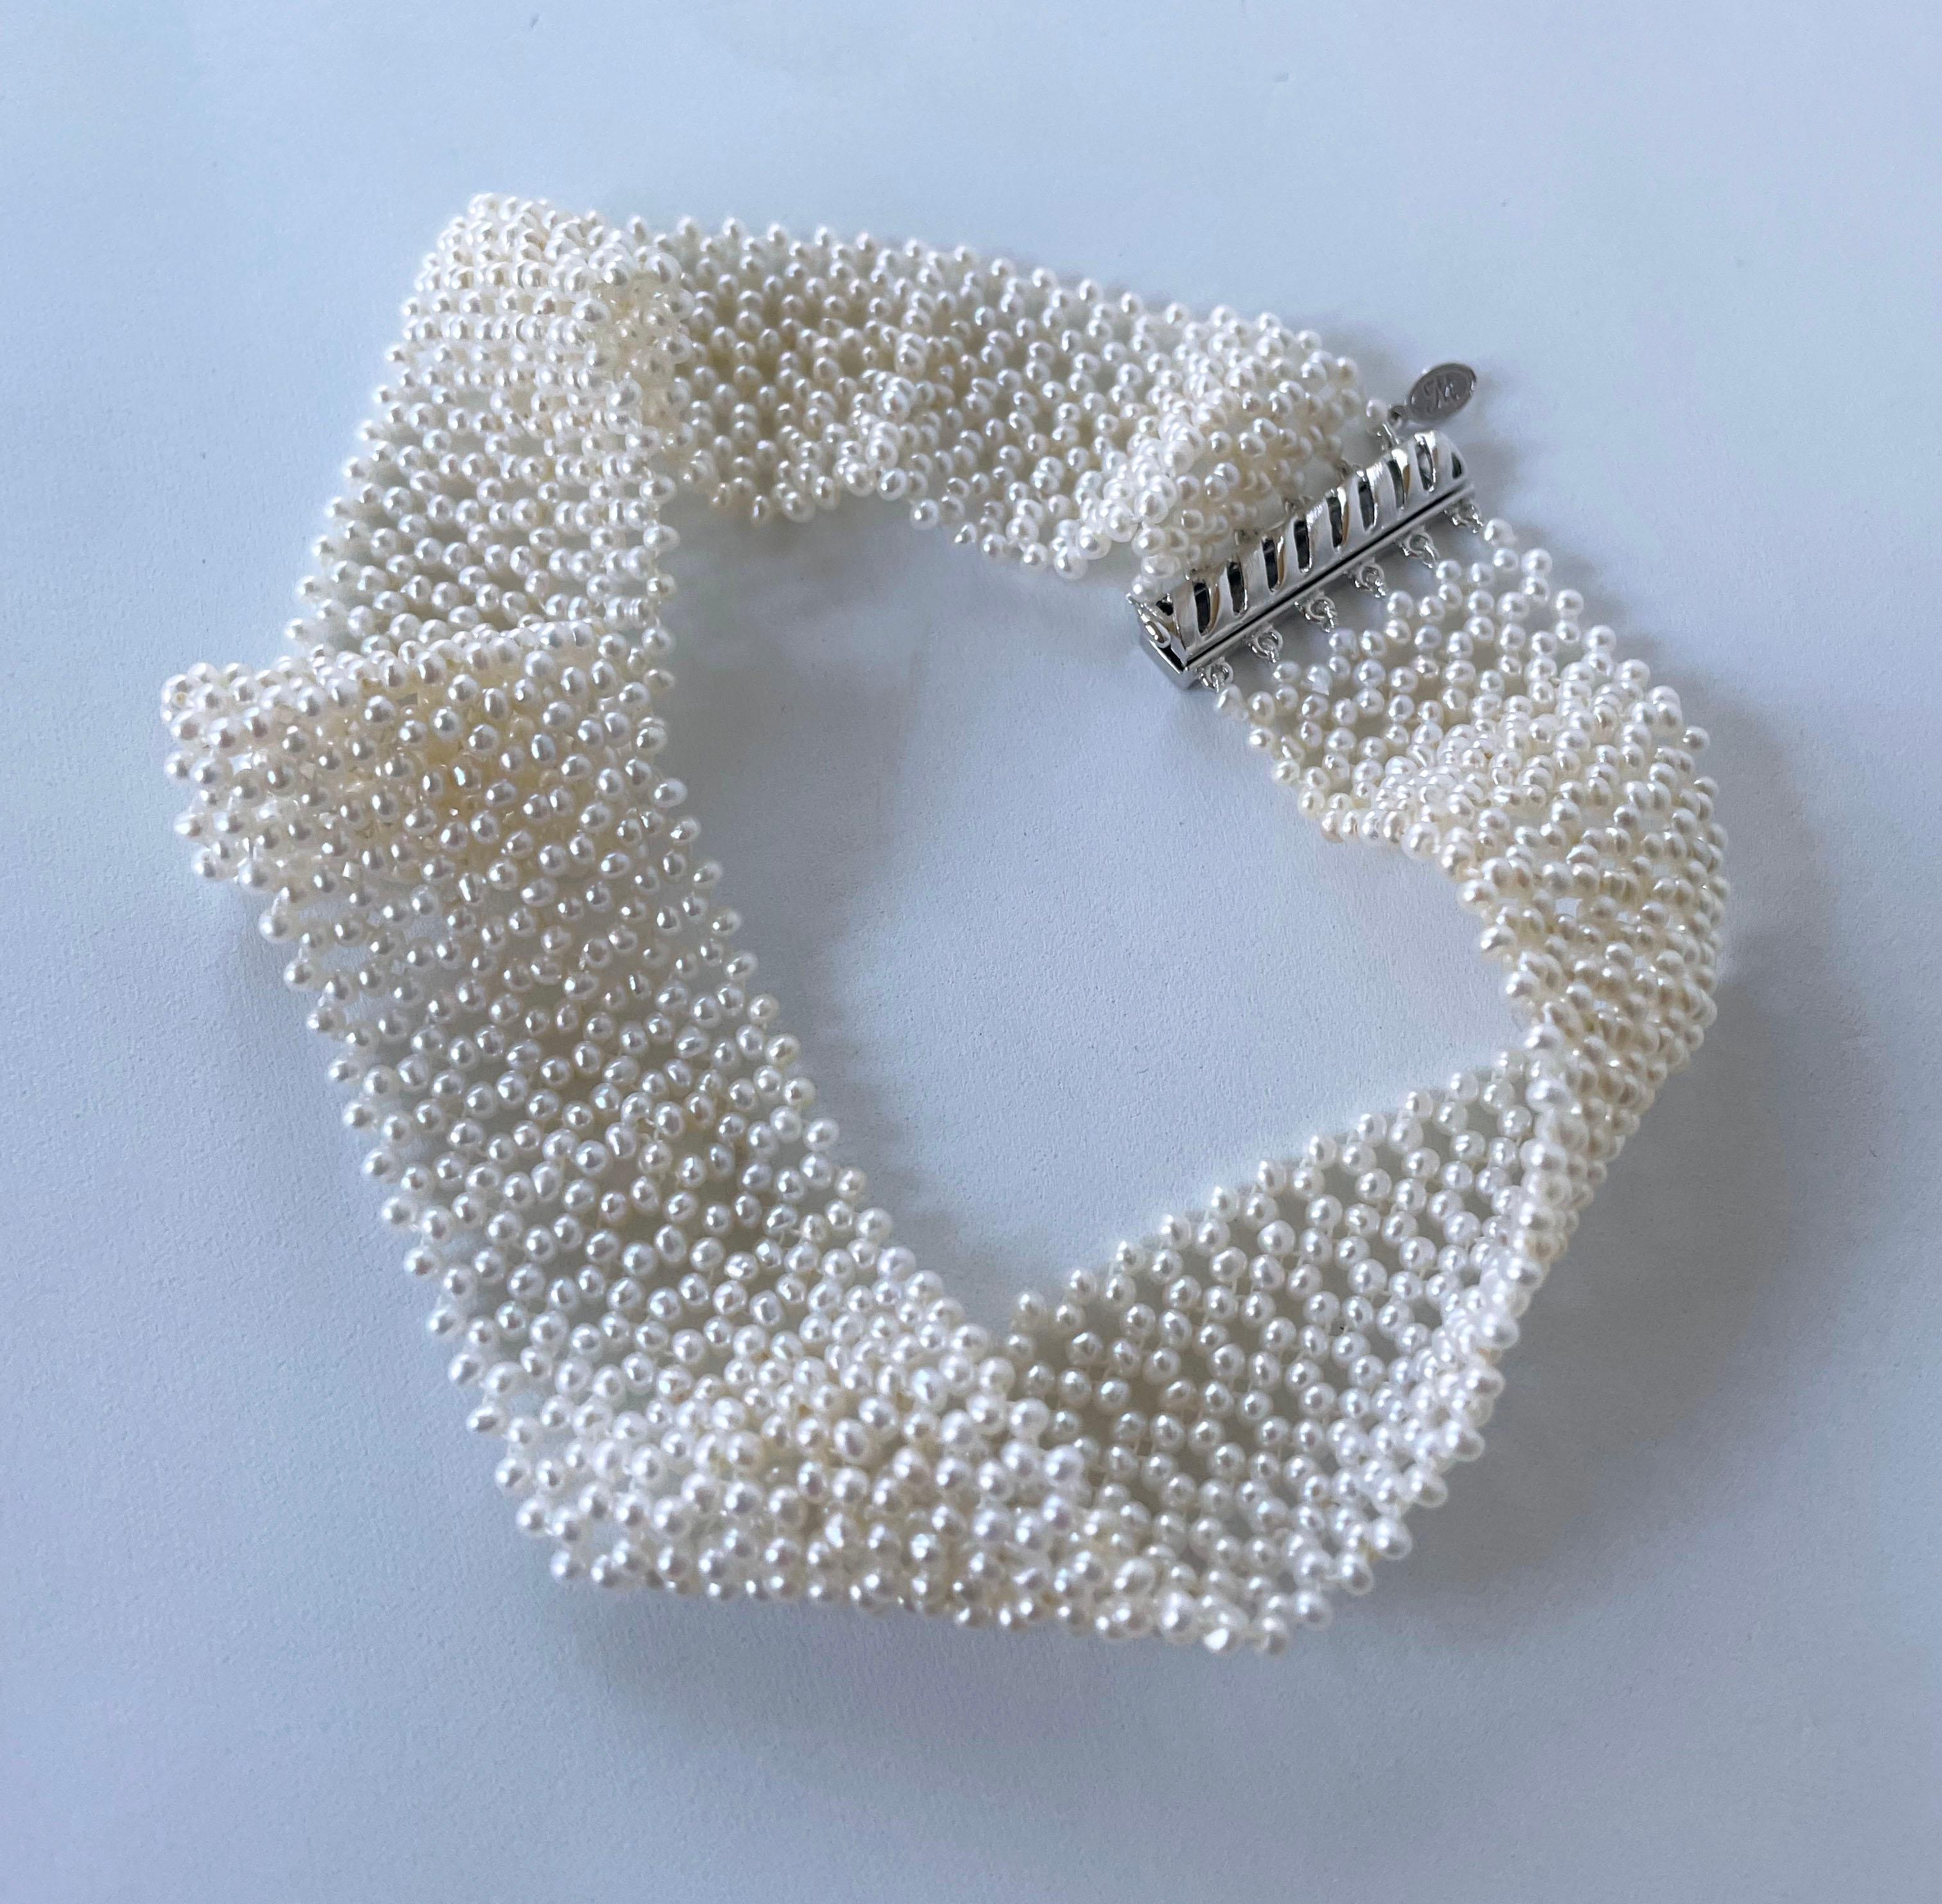 Absolutely stunning Choker by Marina J. This piece is made with all cultured white Seed Pearls intricately hand woven together into a fine Lace like design, inspired by old world jewelry. This piece is woven with a slight graduation, giving the